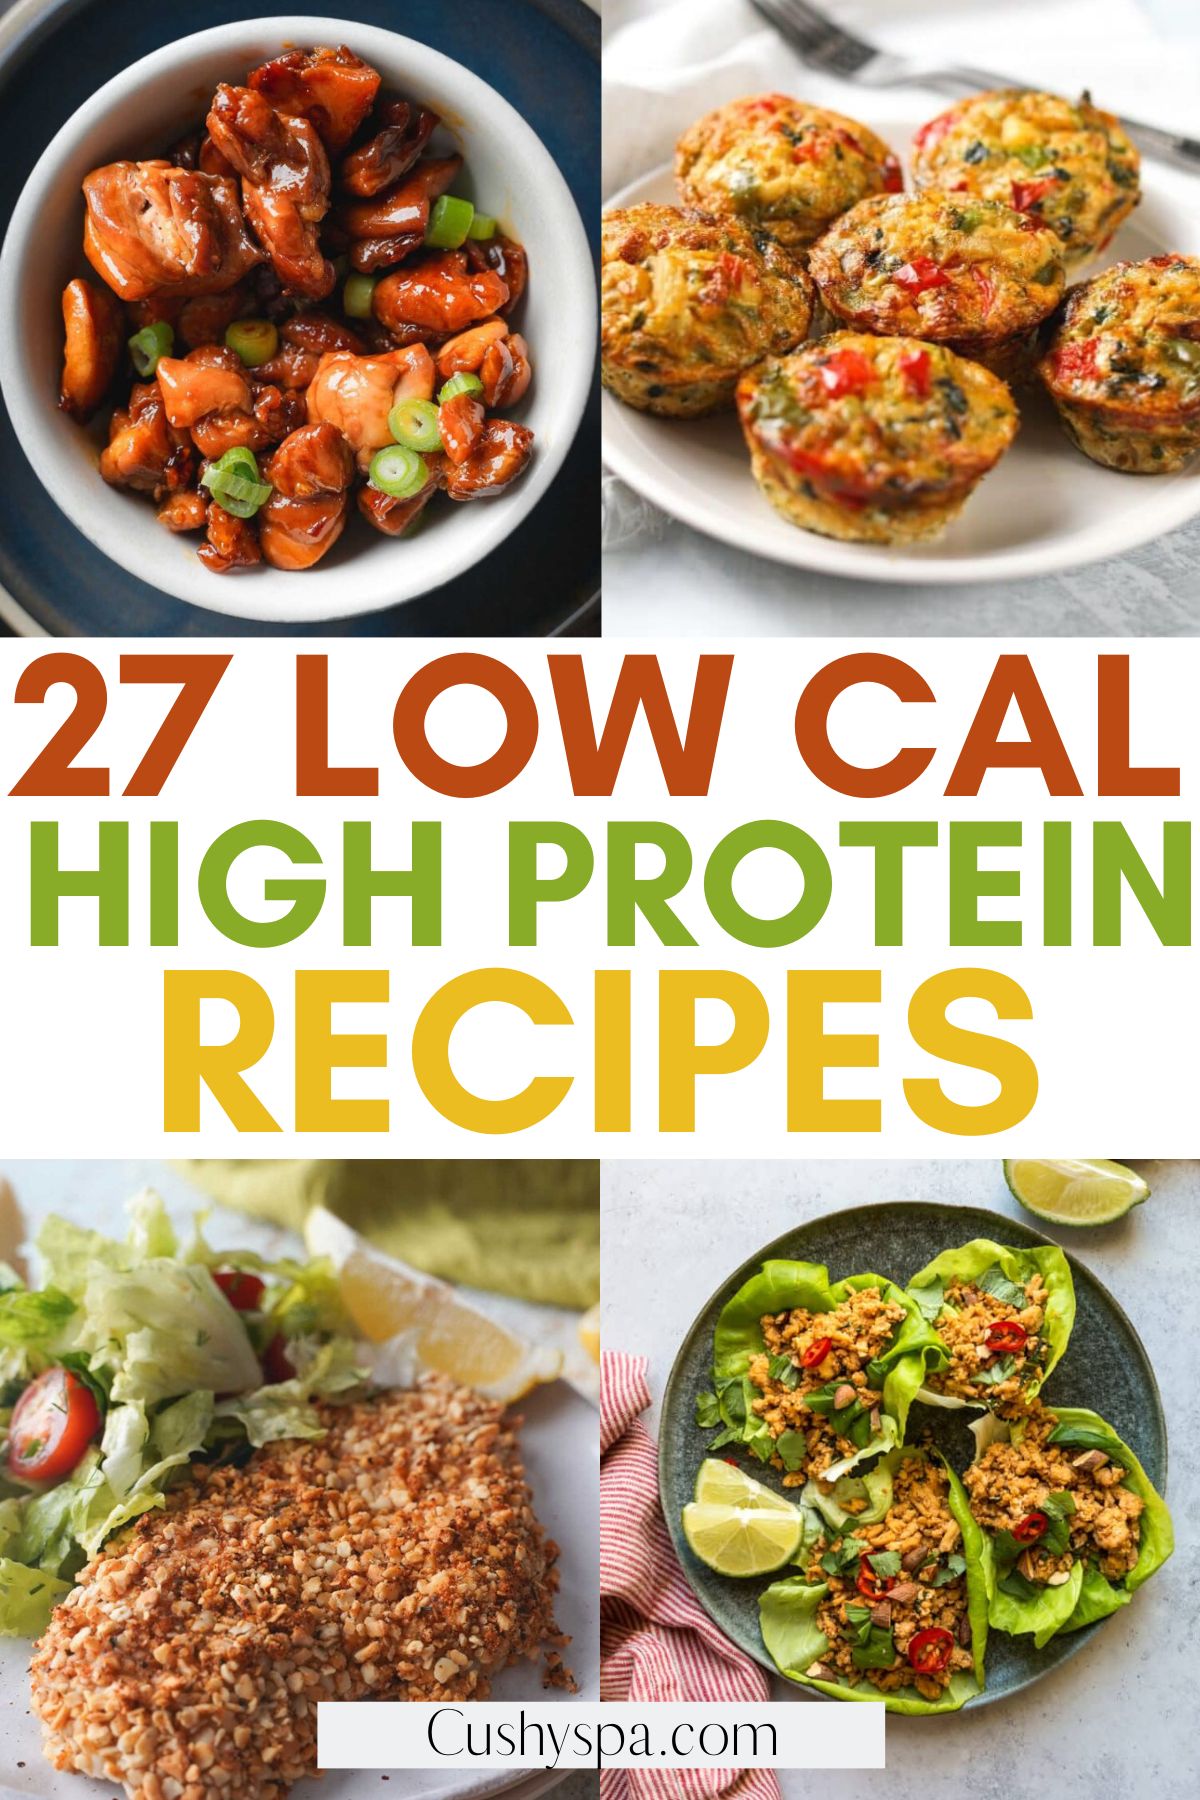 Low Calorie High Protein Recipes